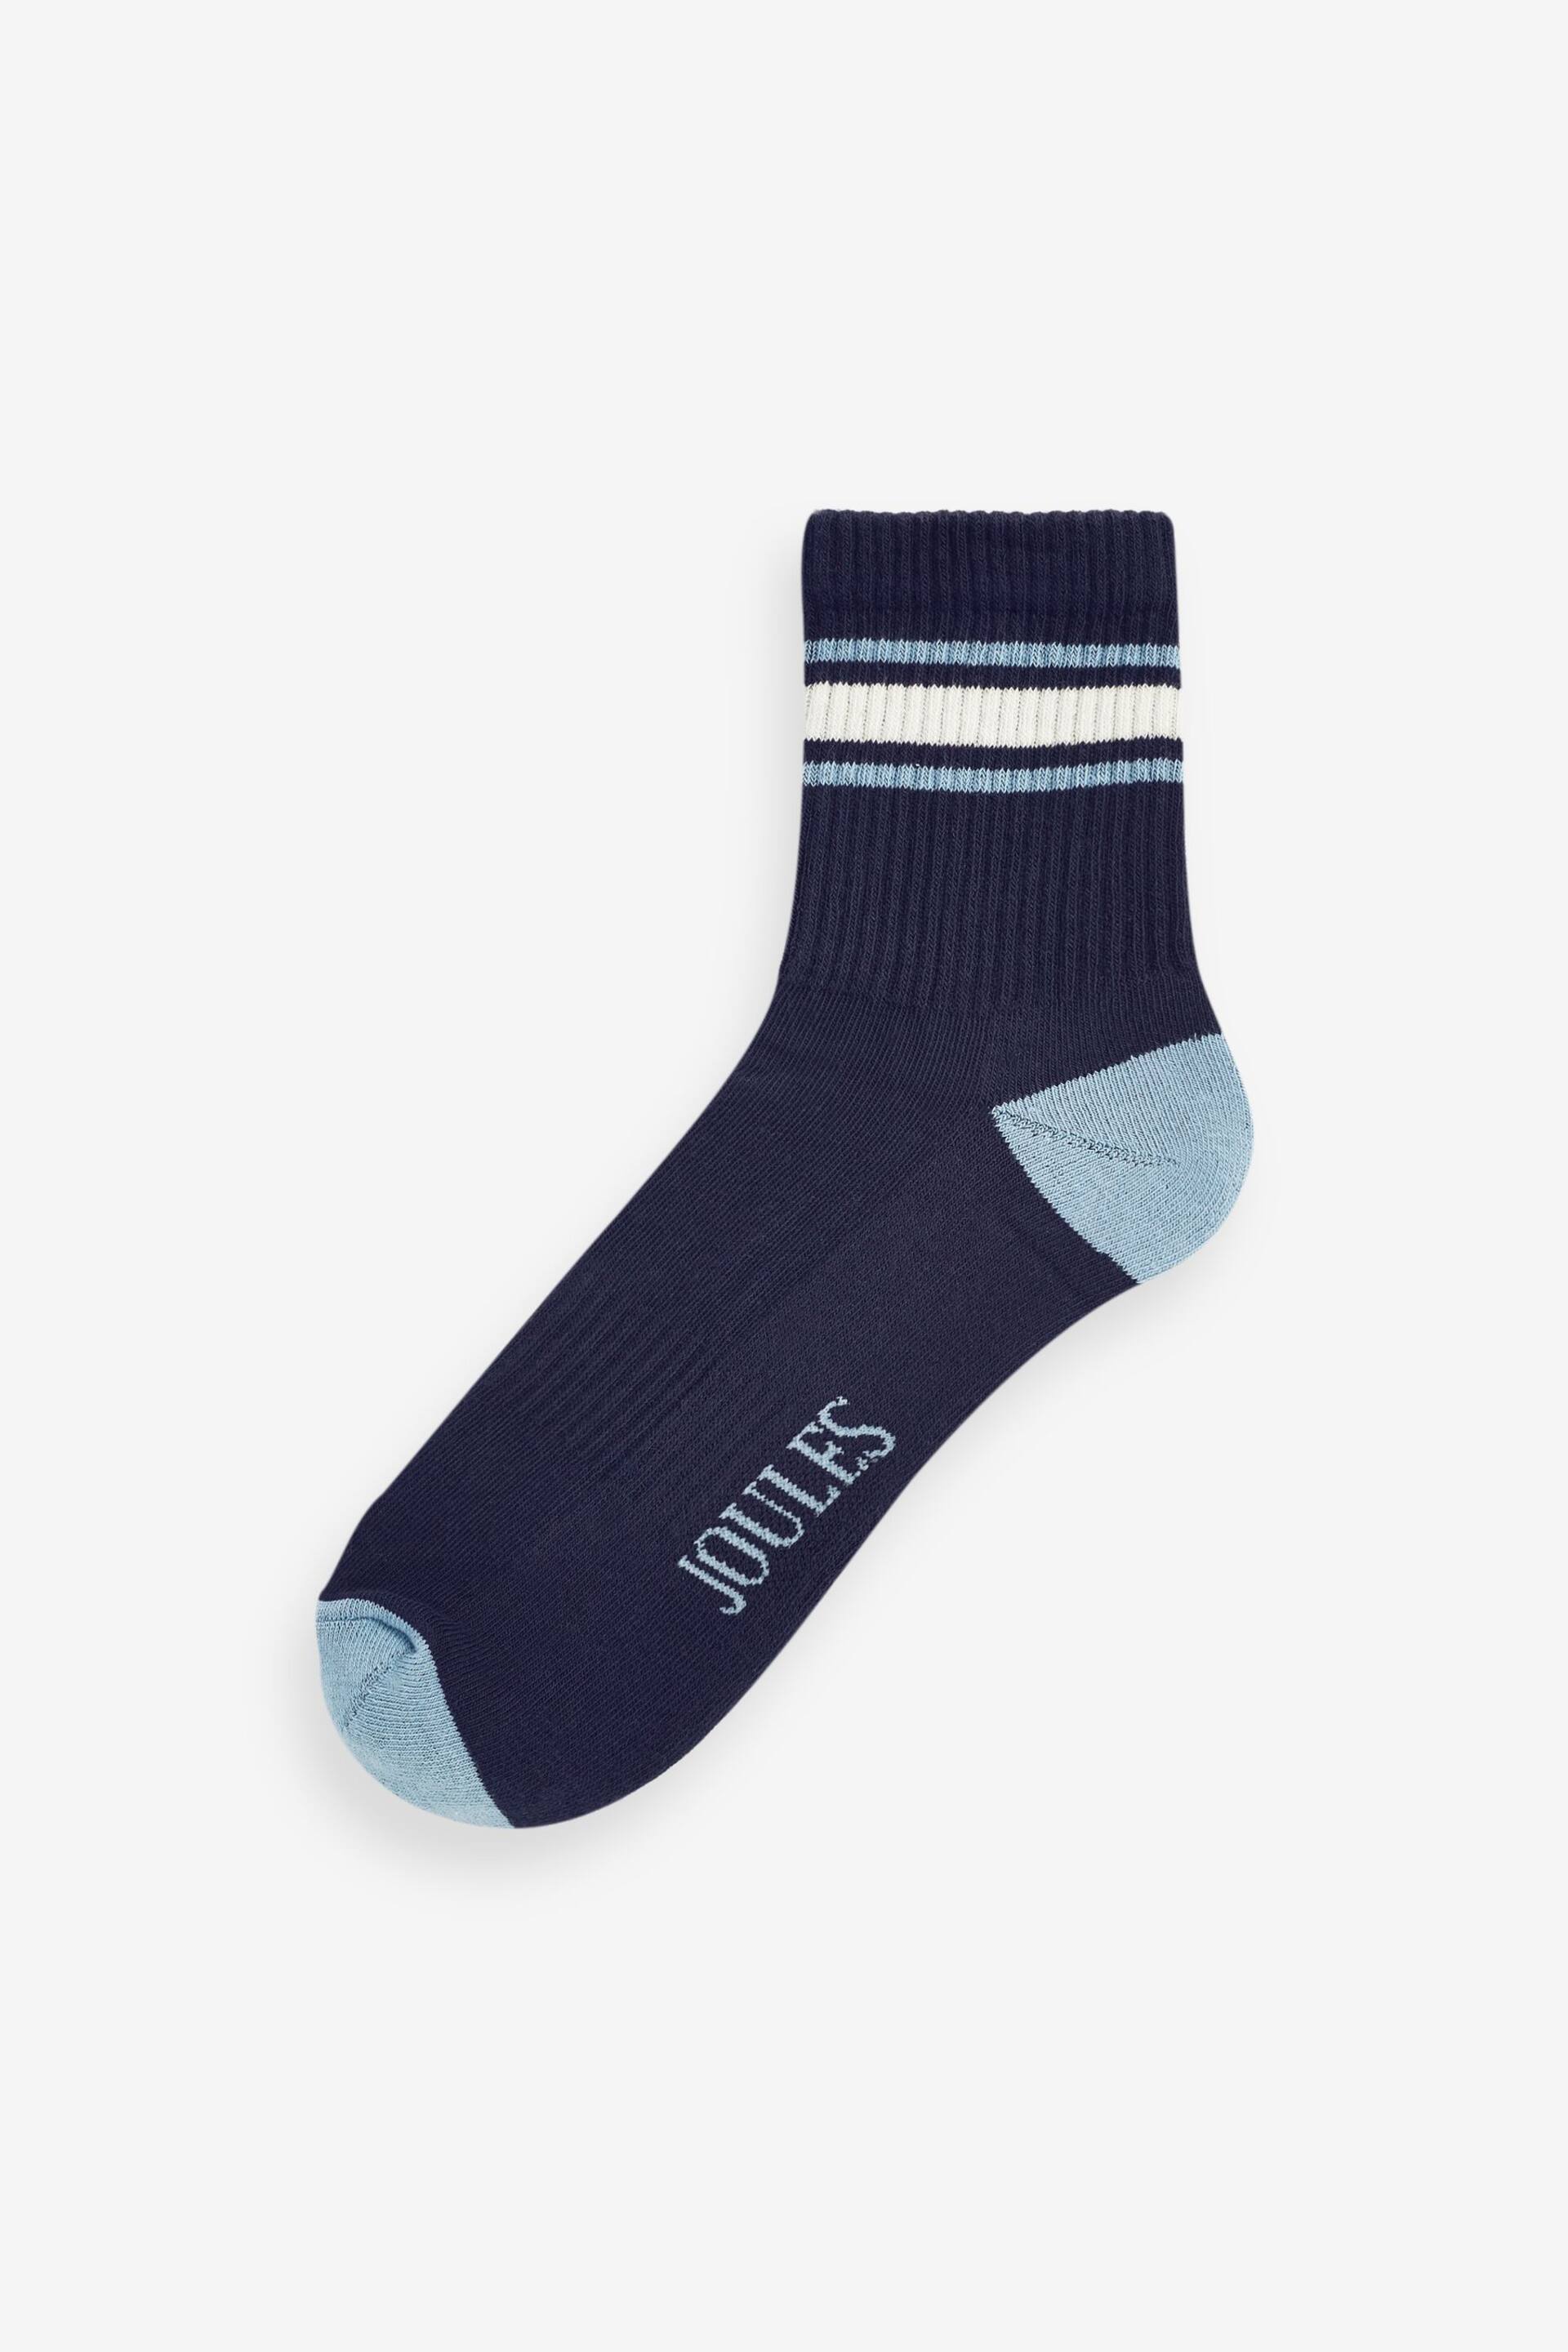 Joules Volley White/Blue Tennis Socks 2PK - Image 2 of 5